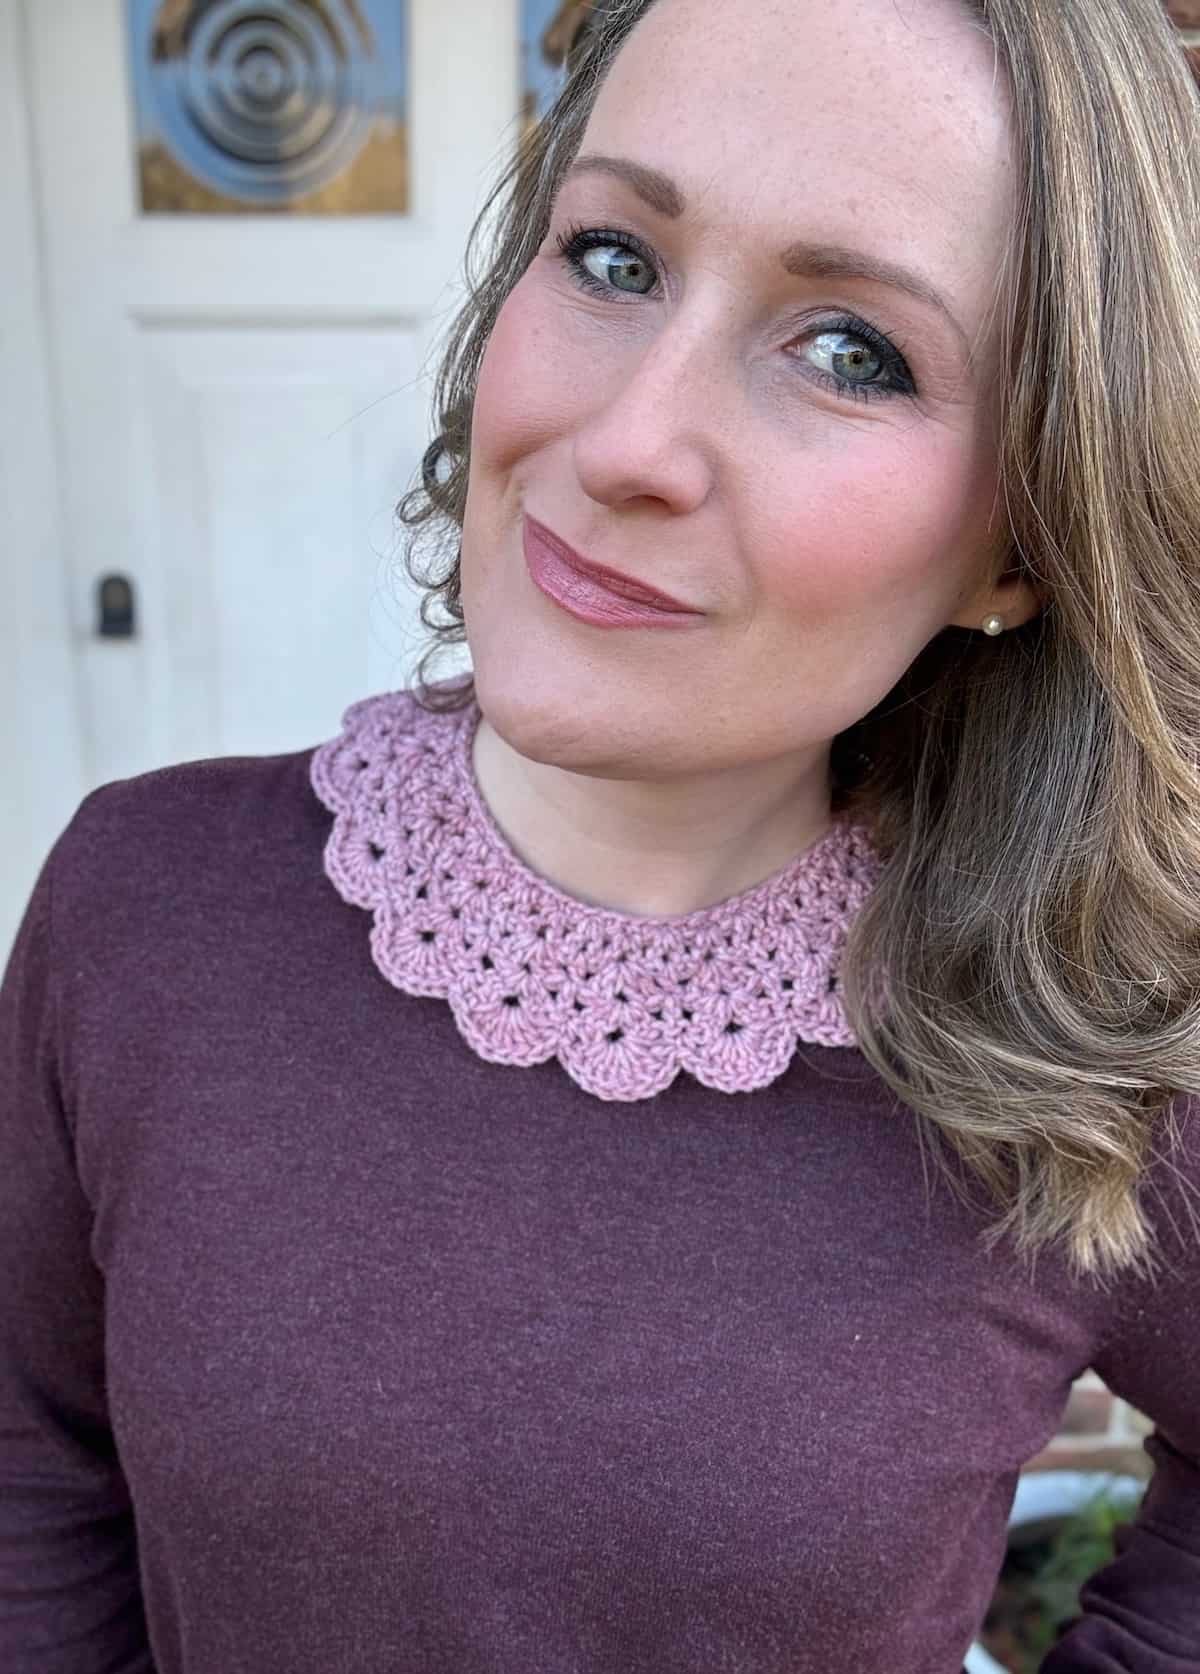 A woman wearing a burgundy sweater and pink crocheted collar.